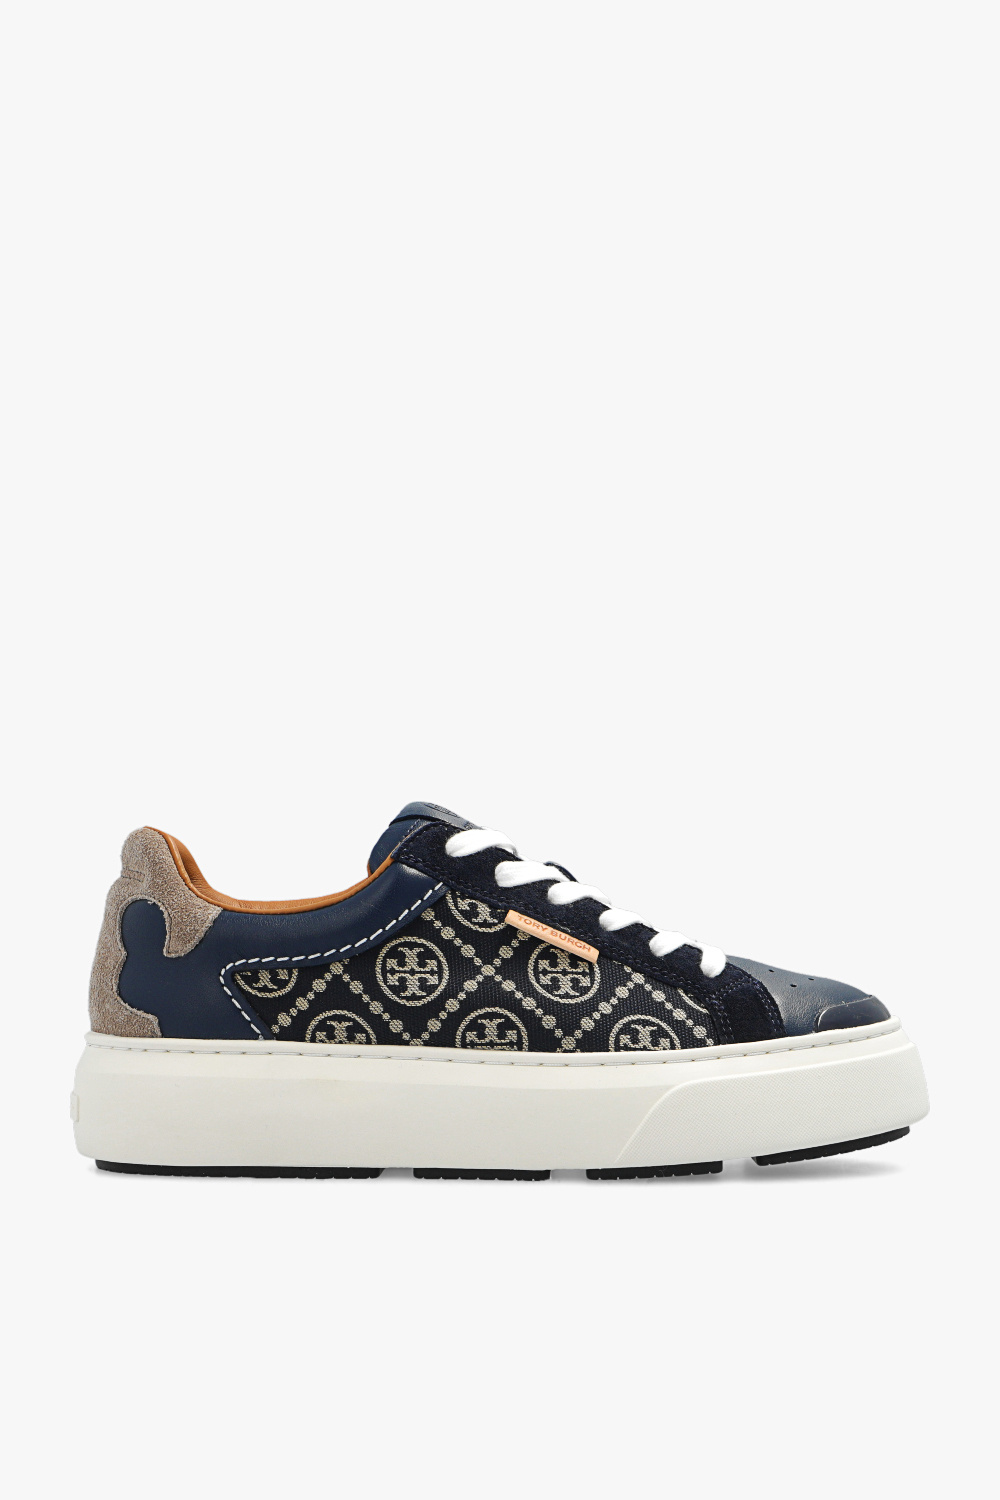 Tory Burch Sneakers with monogram | Women's Shoes | Vitkac